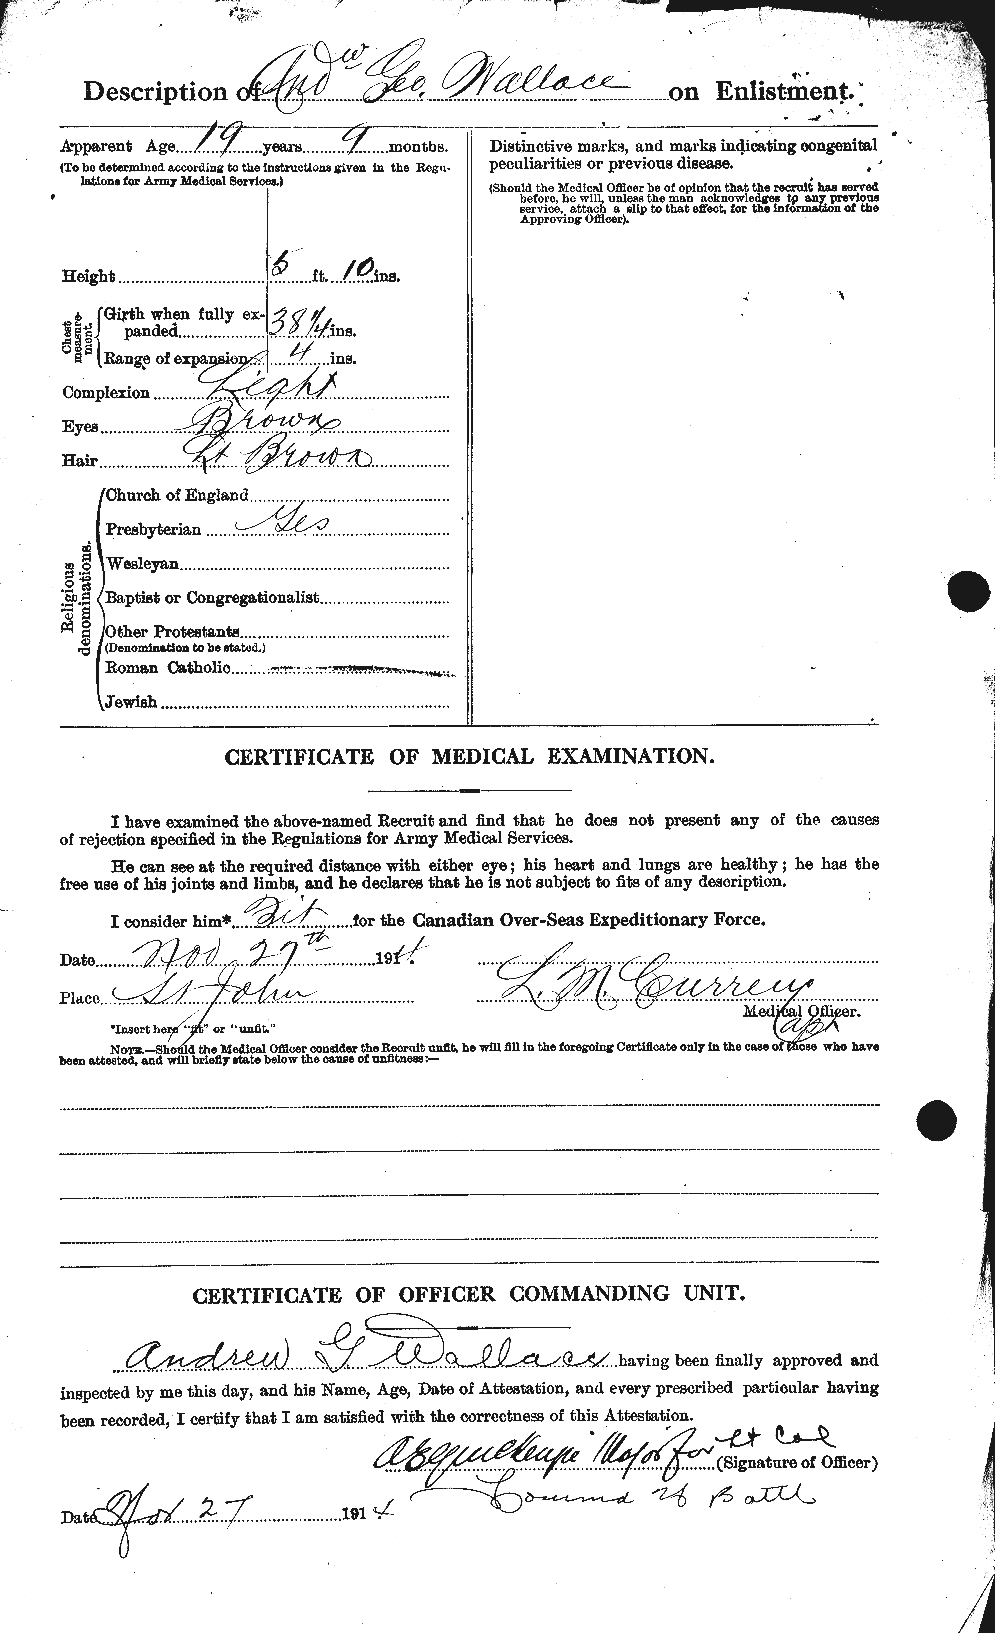 Personnel Records of the First World War - CEF 650326b